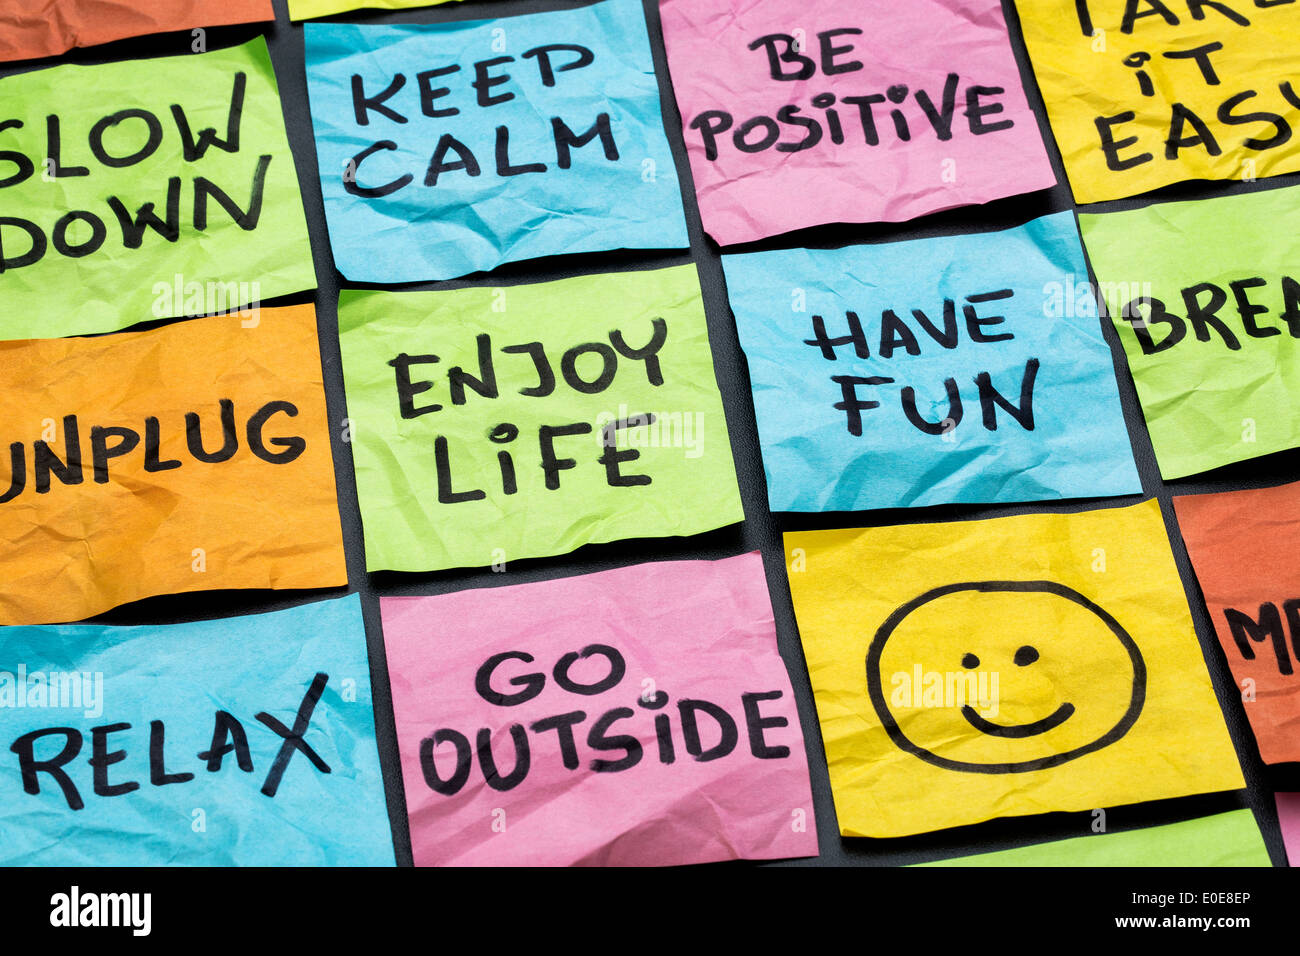 relax, keep calm, enjoy life and other motivational lifestyle reminders on colorful sticky notes Stock Photo